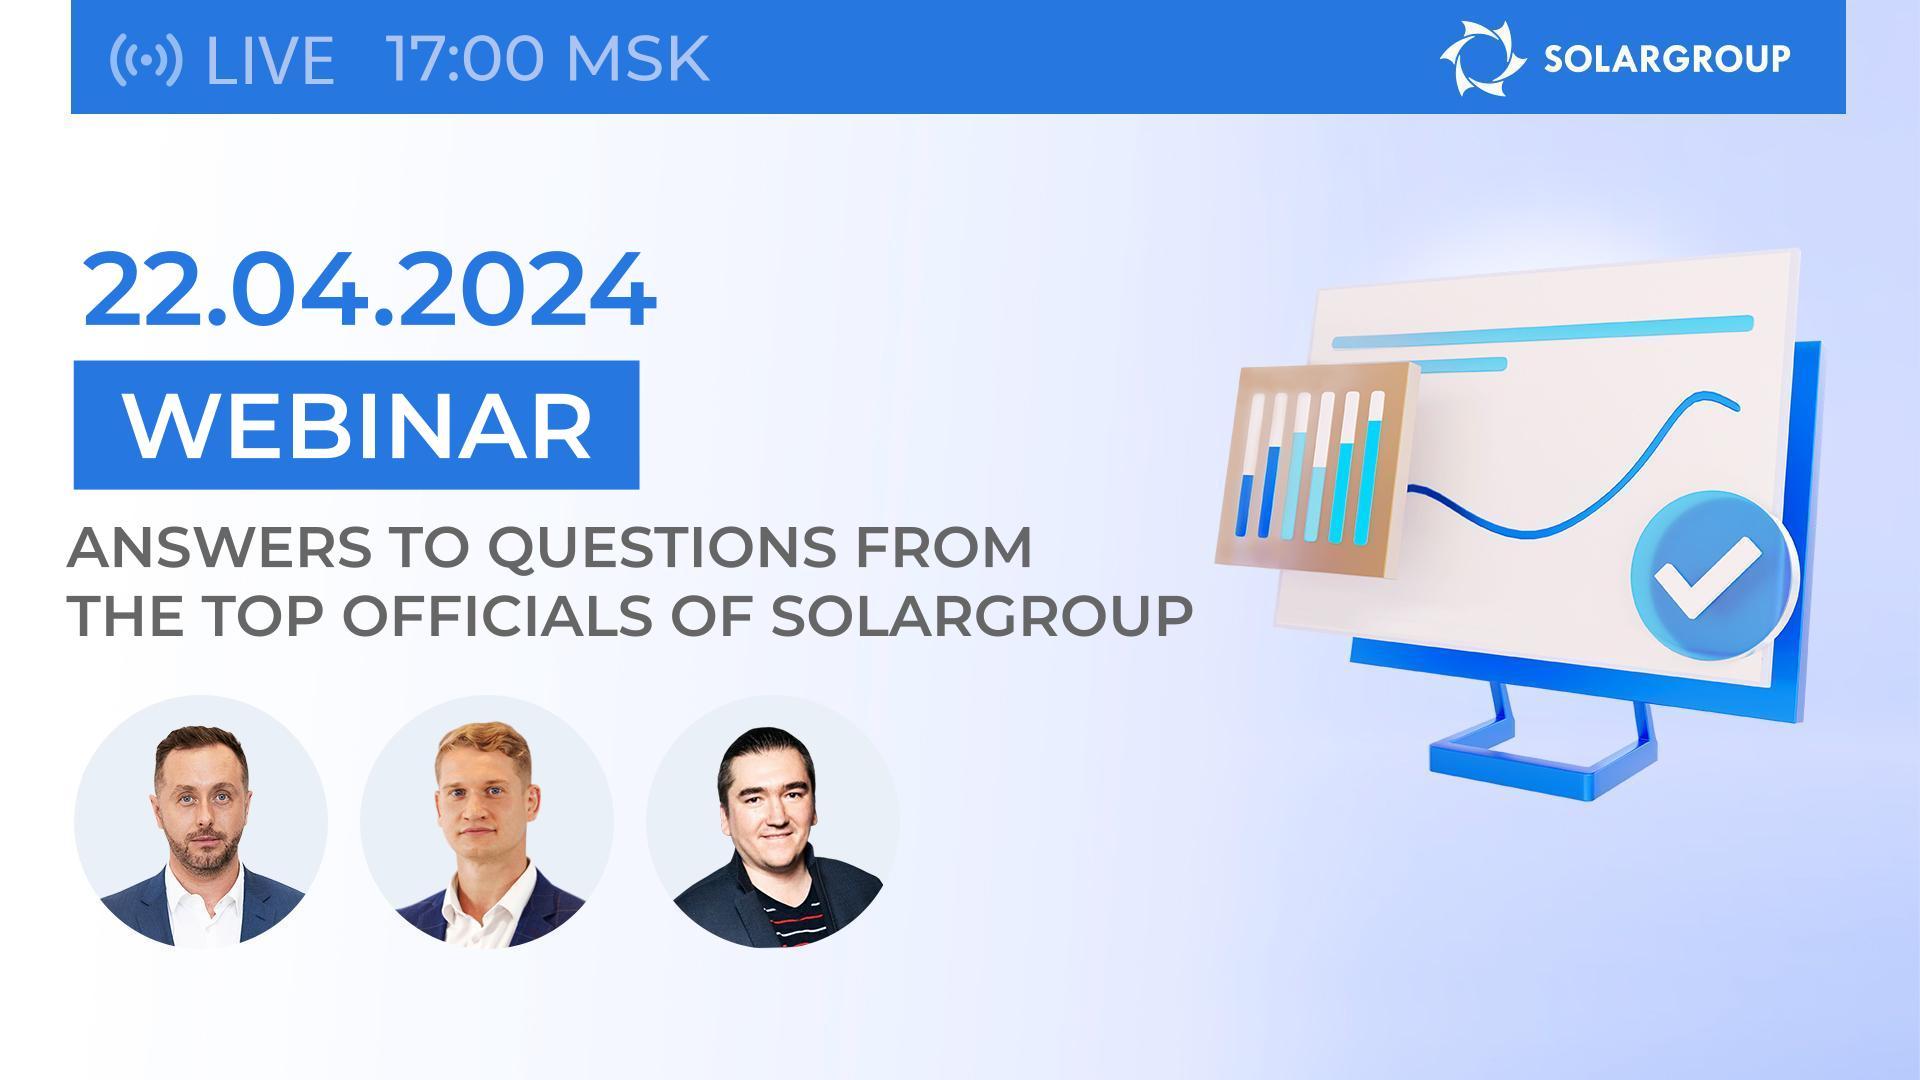 Live broadcast with the SOLARGROUP management